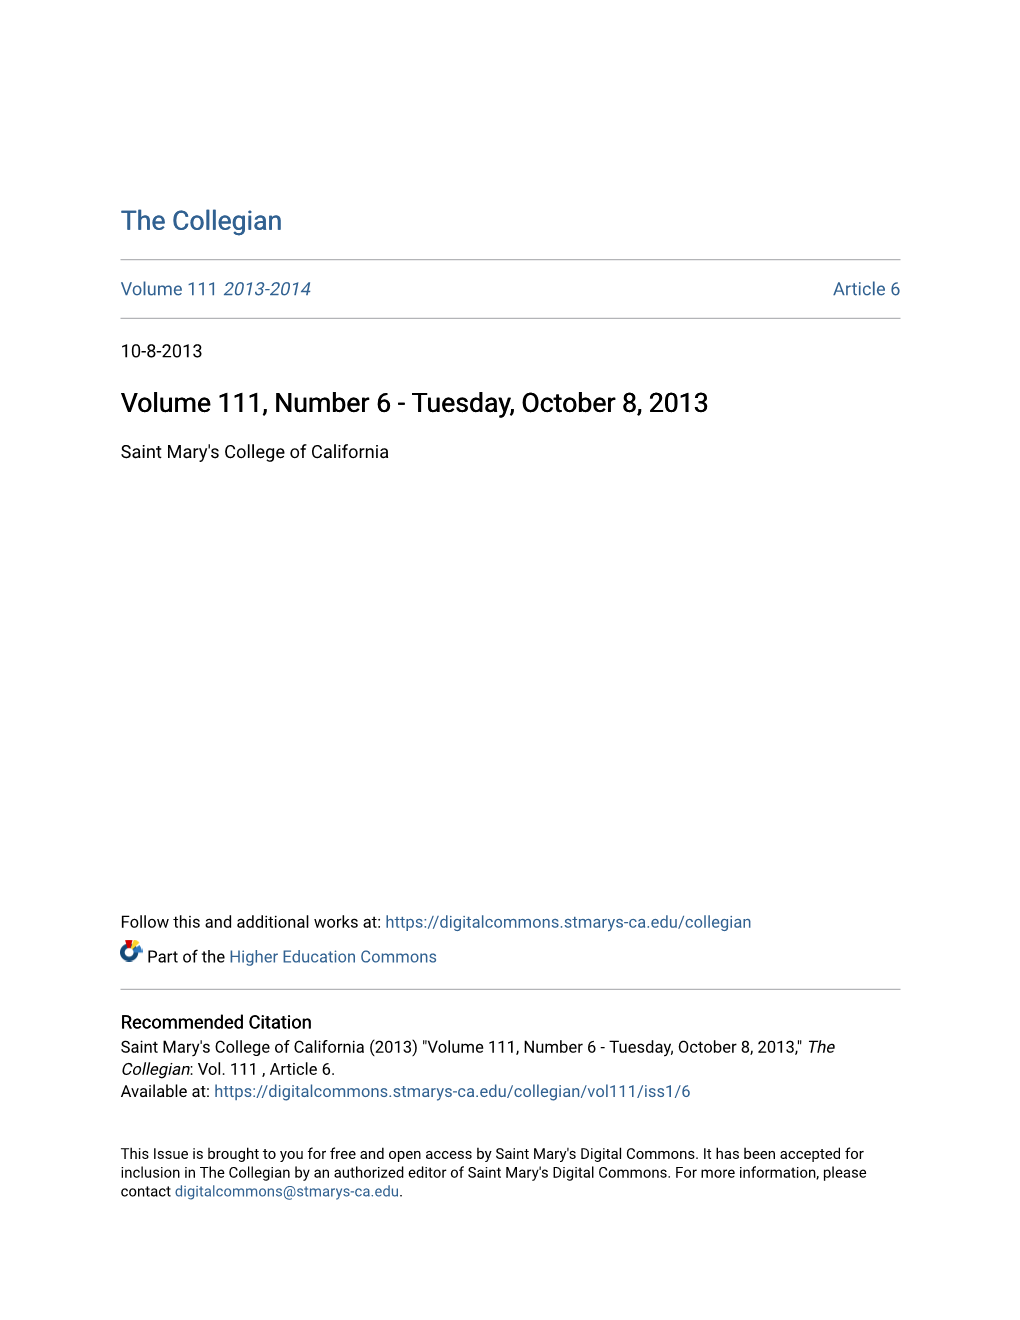 Volume 111, Number 6 - Tuesday, October 8, 2013